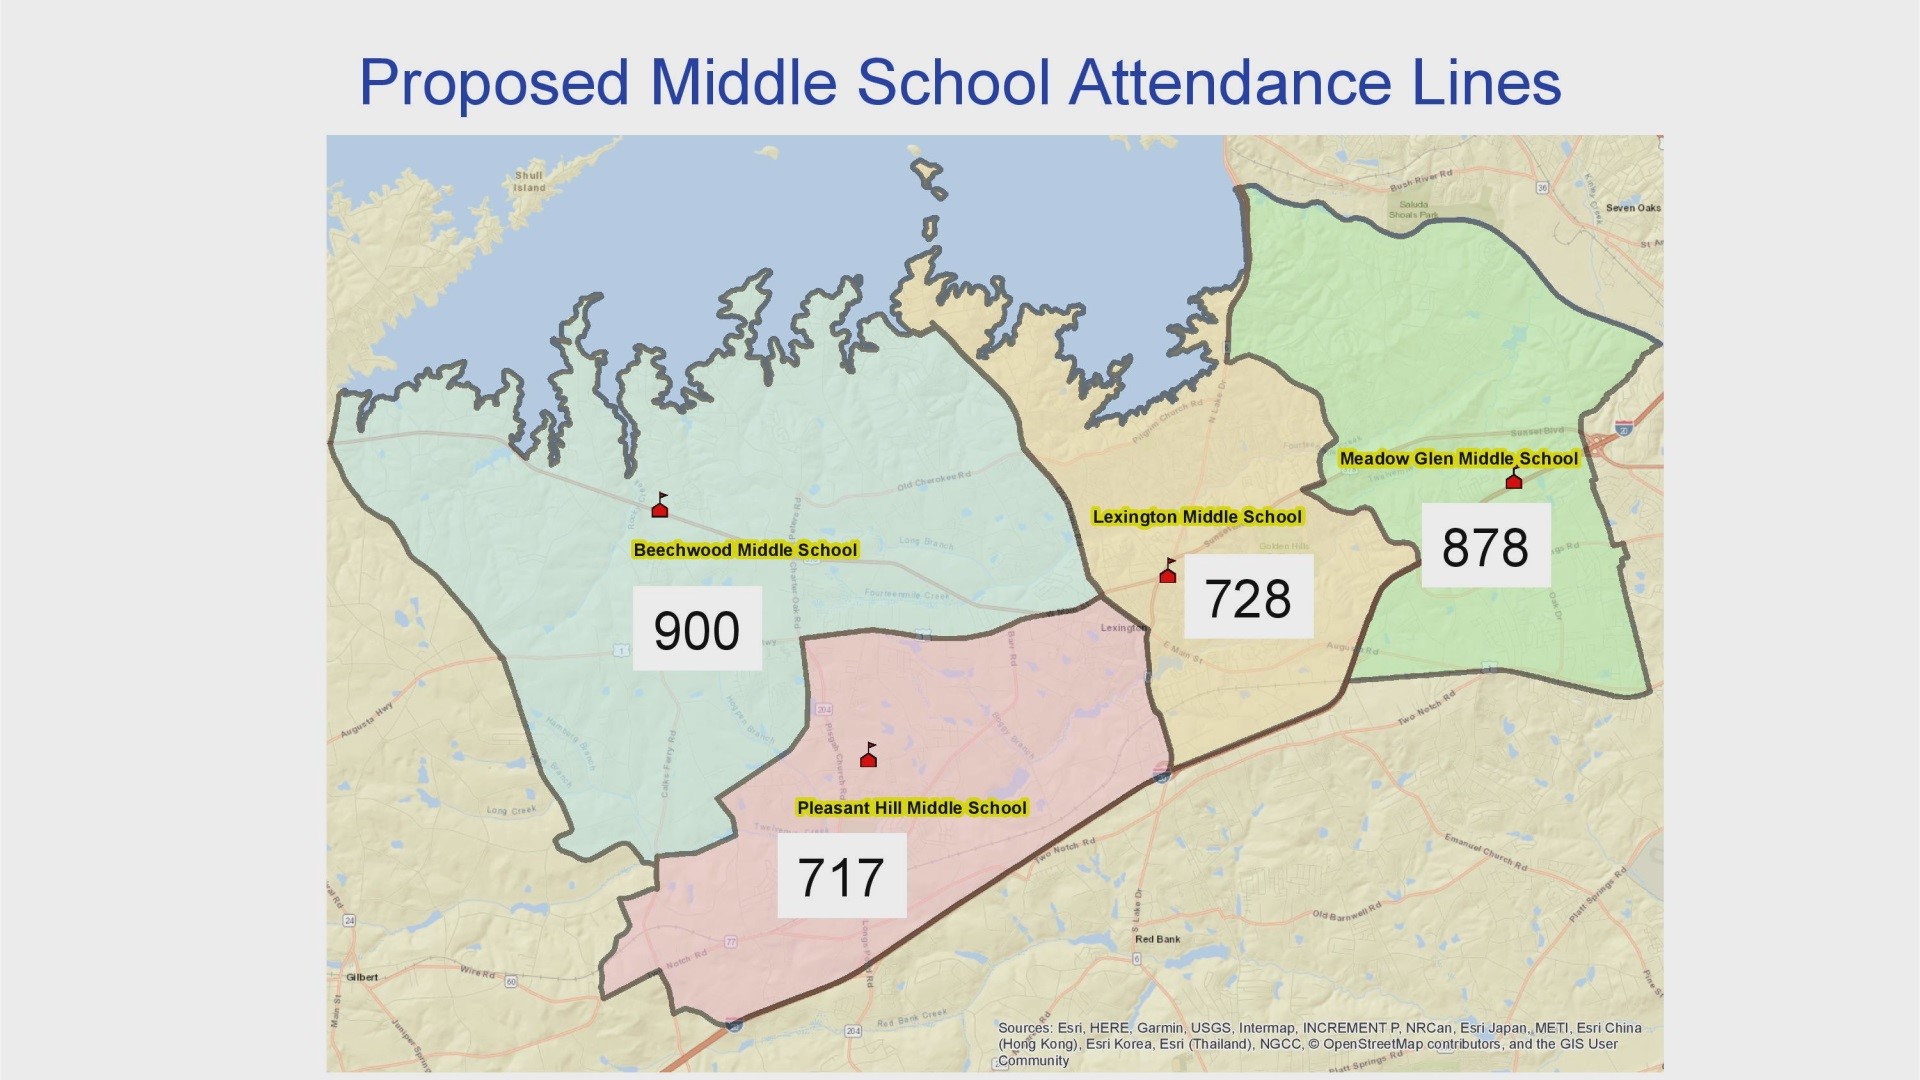 Lexington One makes new changes to proposed middle school lines | wltx.com